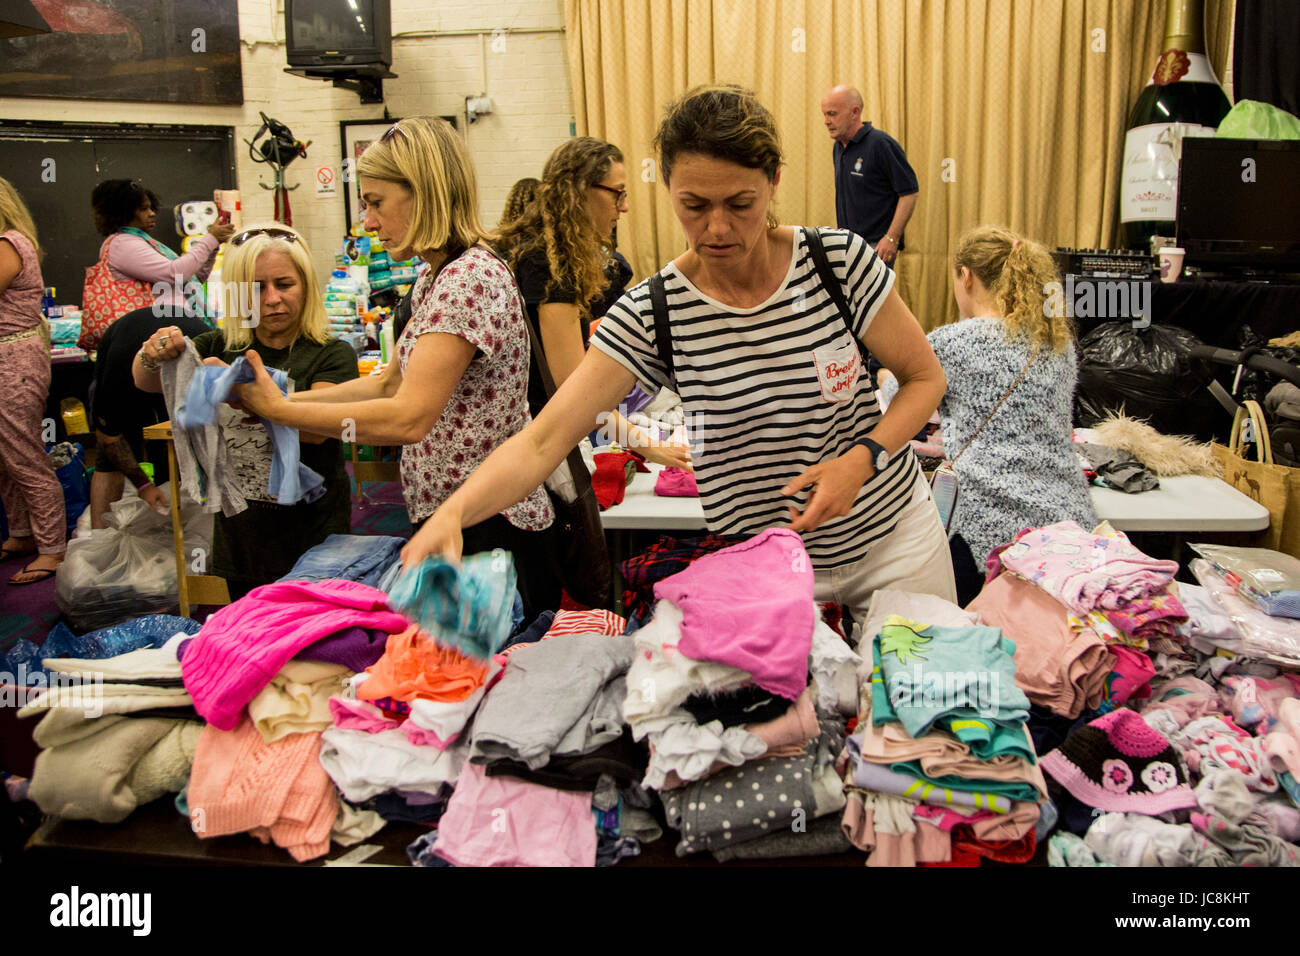 London, UK. 14 June 2017. After the fire in the 24-storey, 120 flat, Grenfell Tower in North Kensington, Notting Hill, residents help out at the Maxilla Social Club where food and clothes donations are sorted. Photo: Bettina Strenske/Alamy Live News Stock Photo